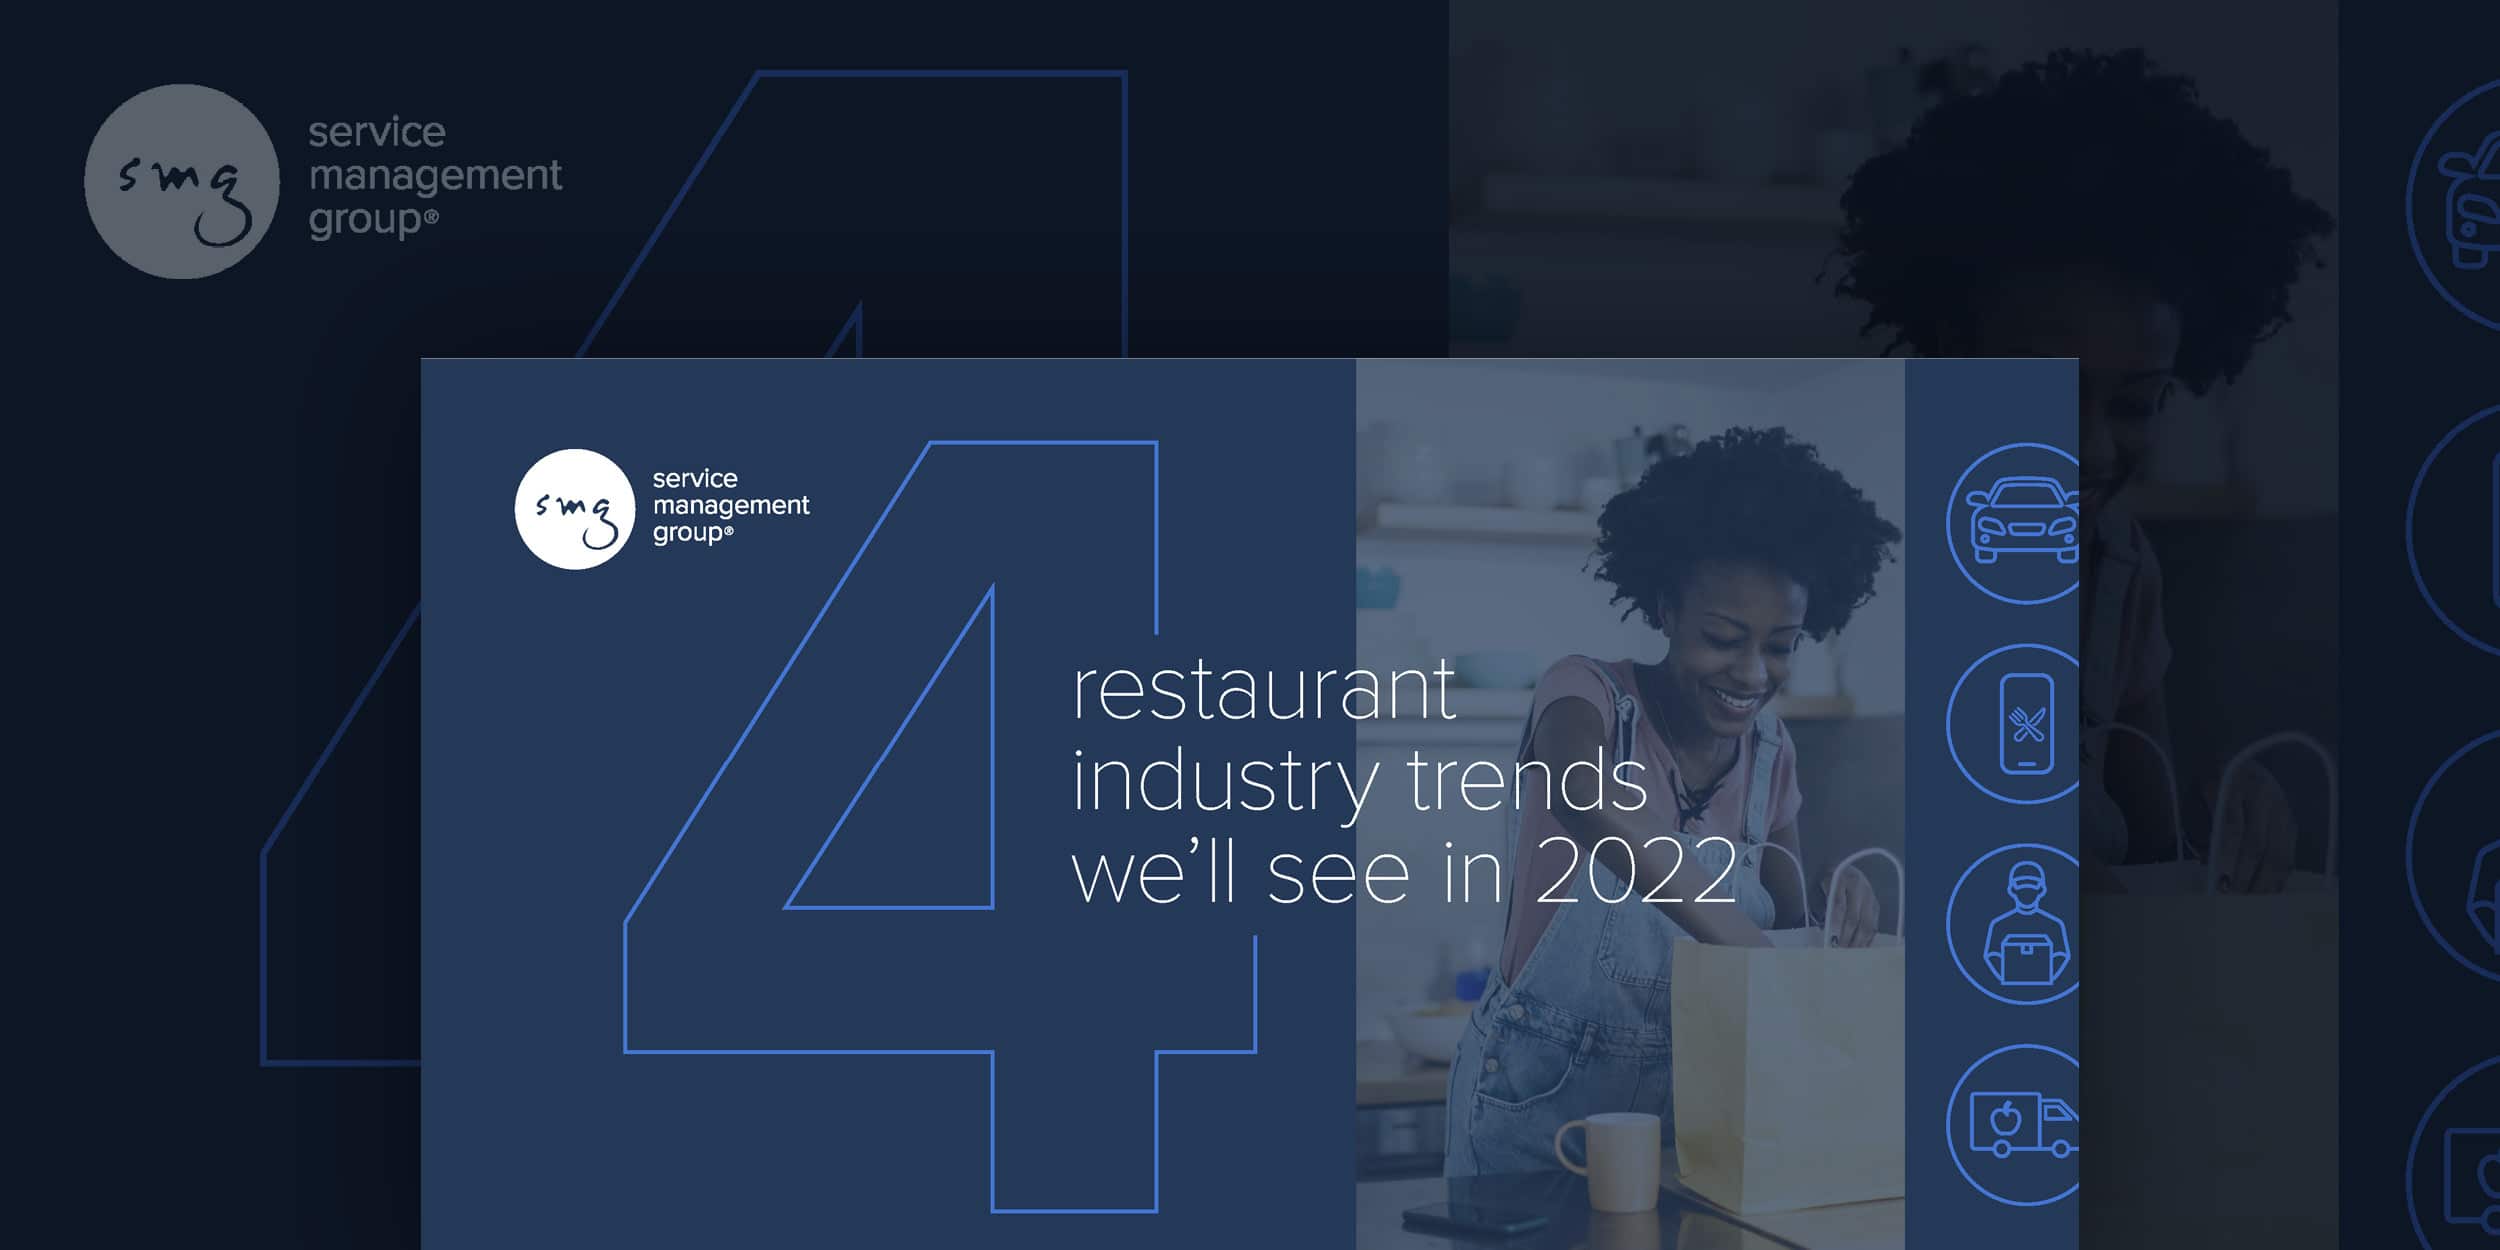 4 restaurant industry trends we’ll see in 2022 SMG